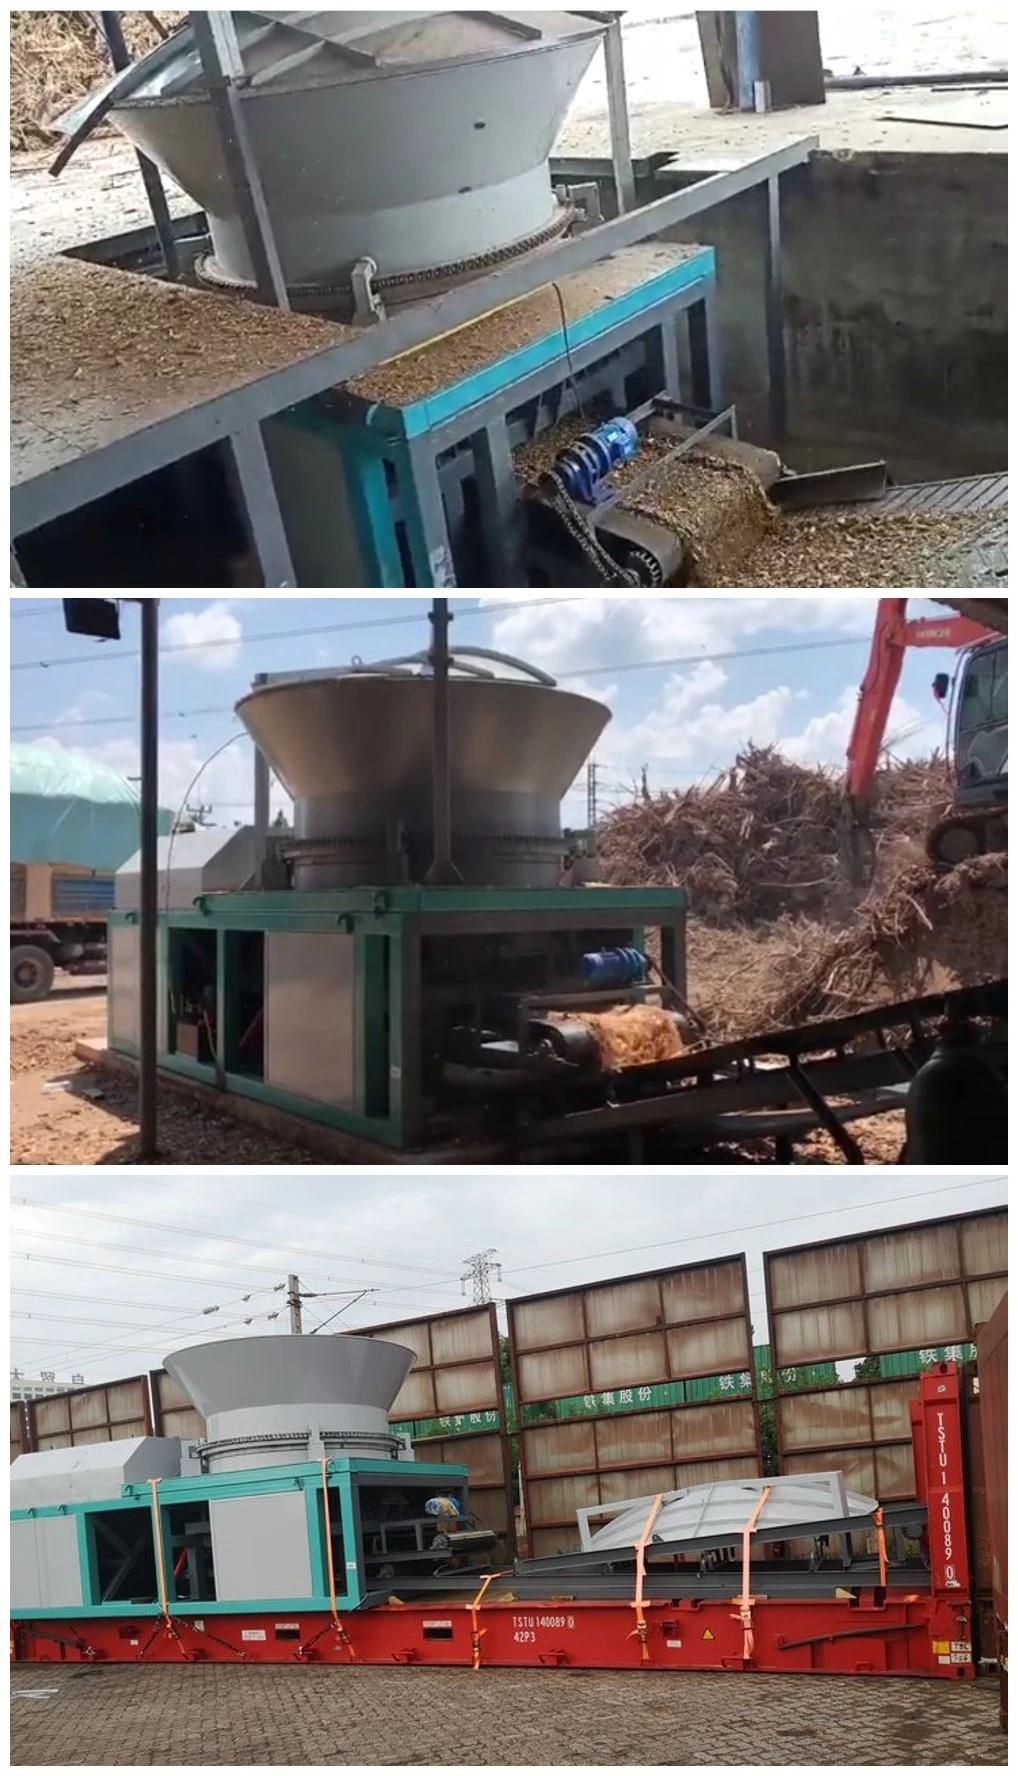 Wood Pallet Nail Shredder/Wood Shredding Machine Excellent Performance Powerful Superior Quality Preferential Price